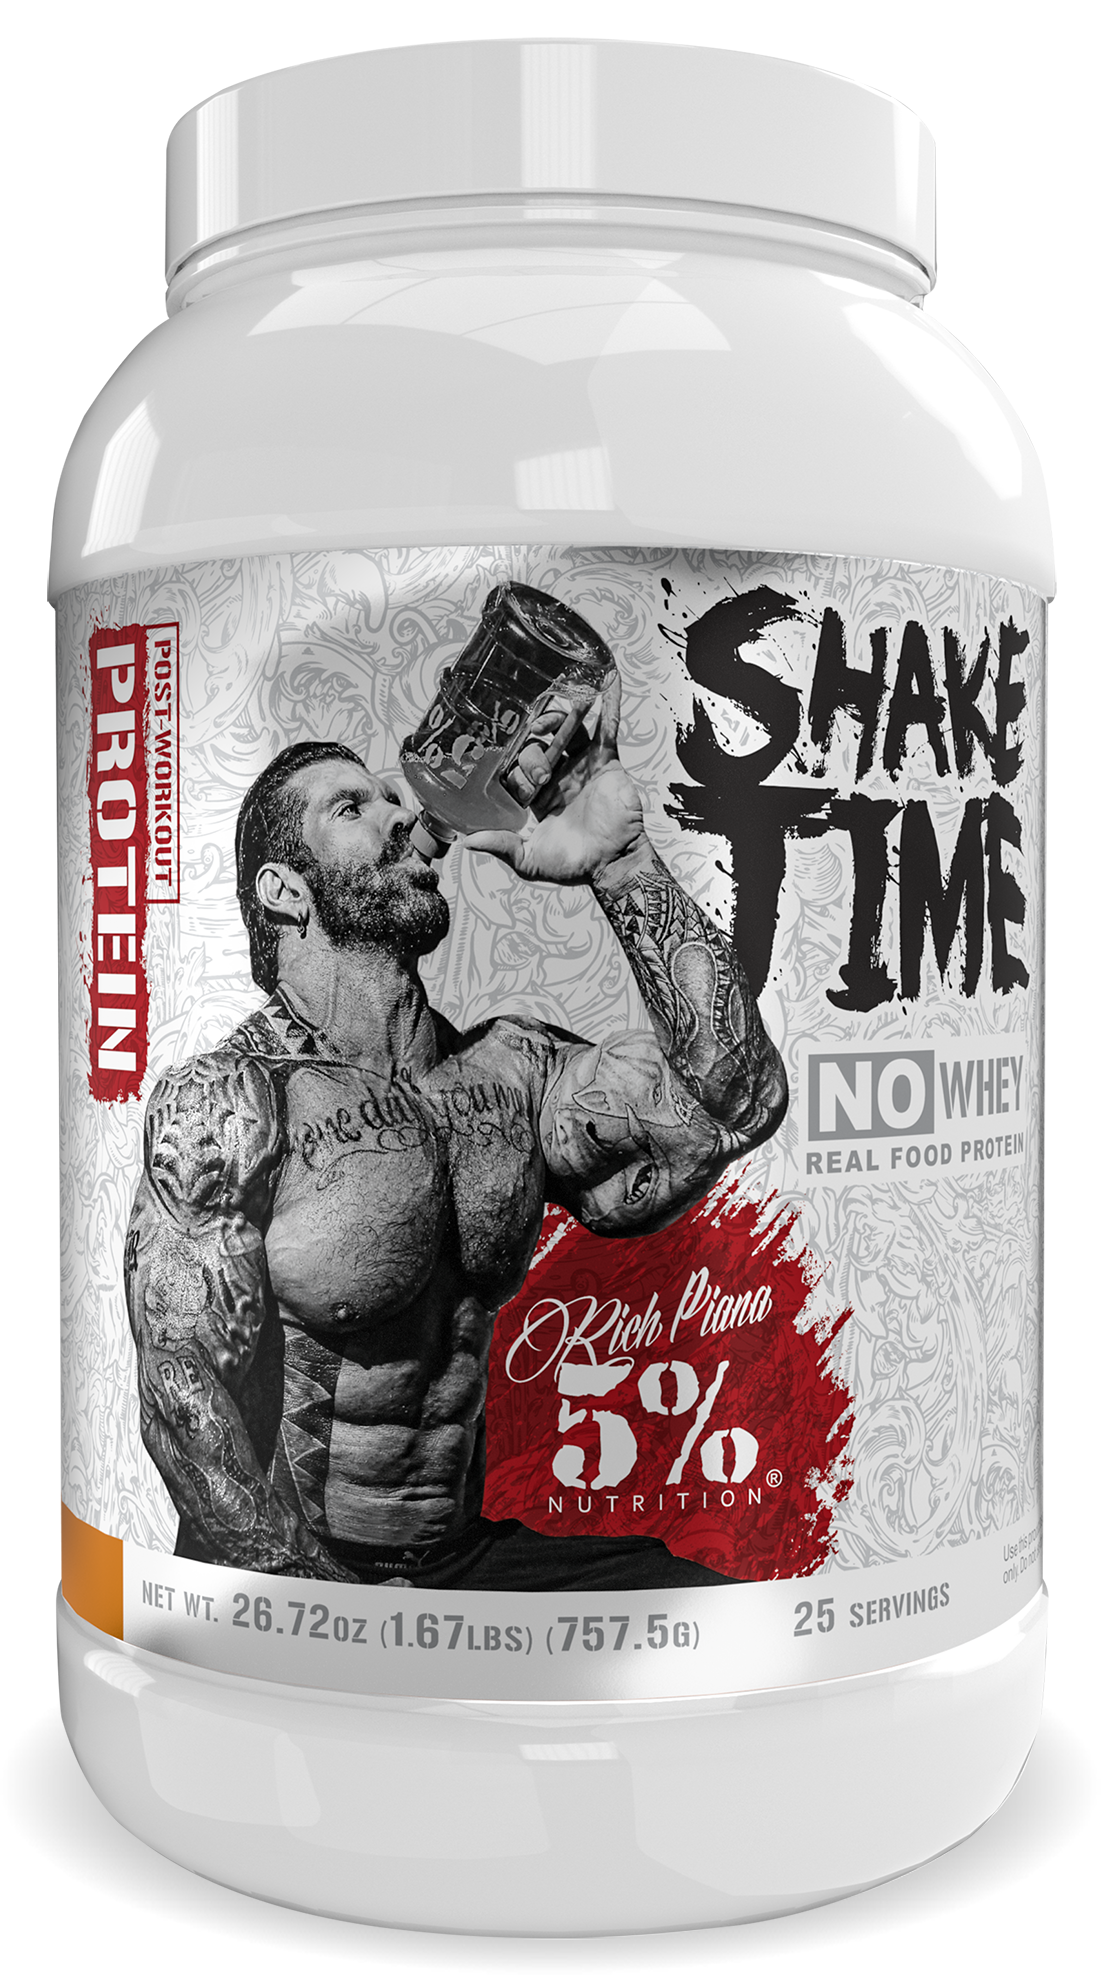 5%n Nutrition - Shake Time Real Food Protein